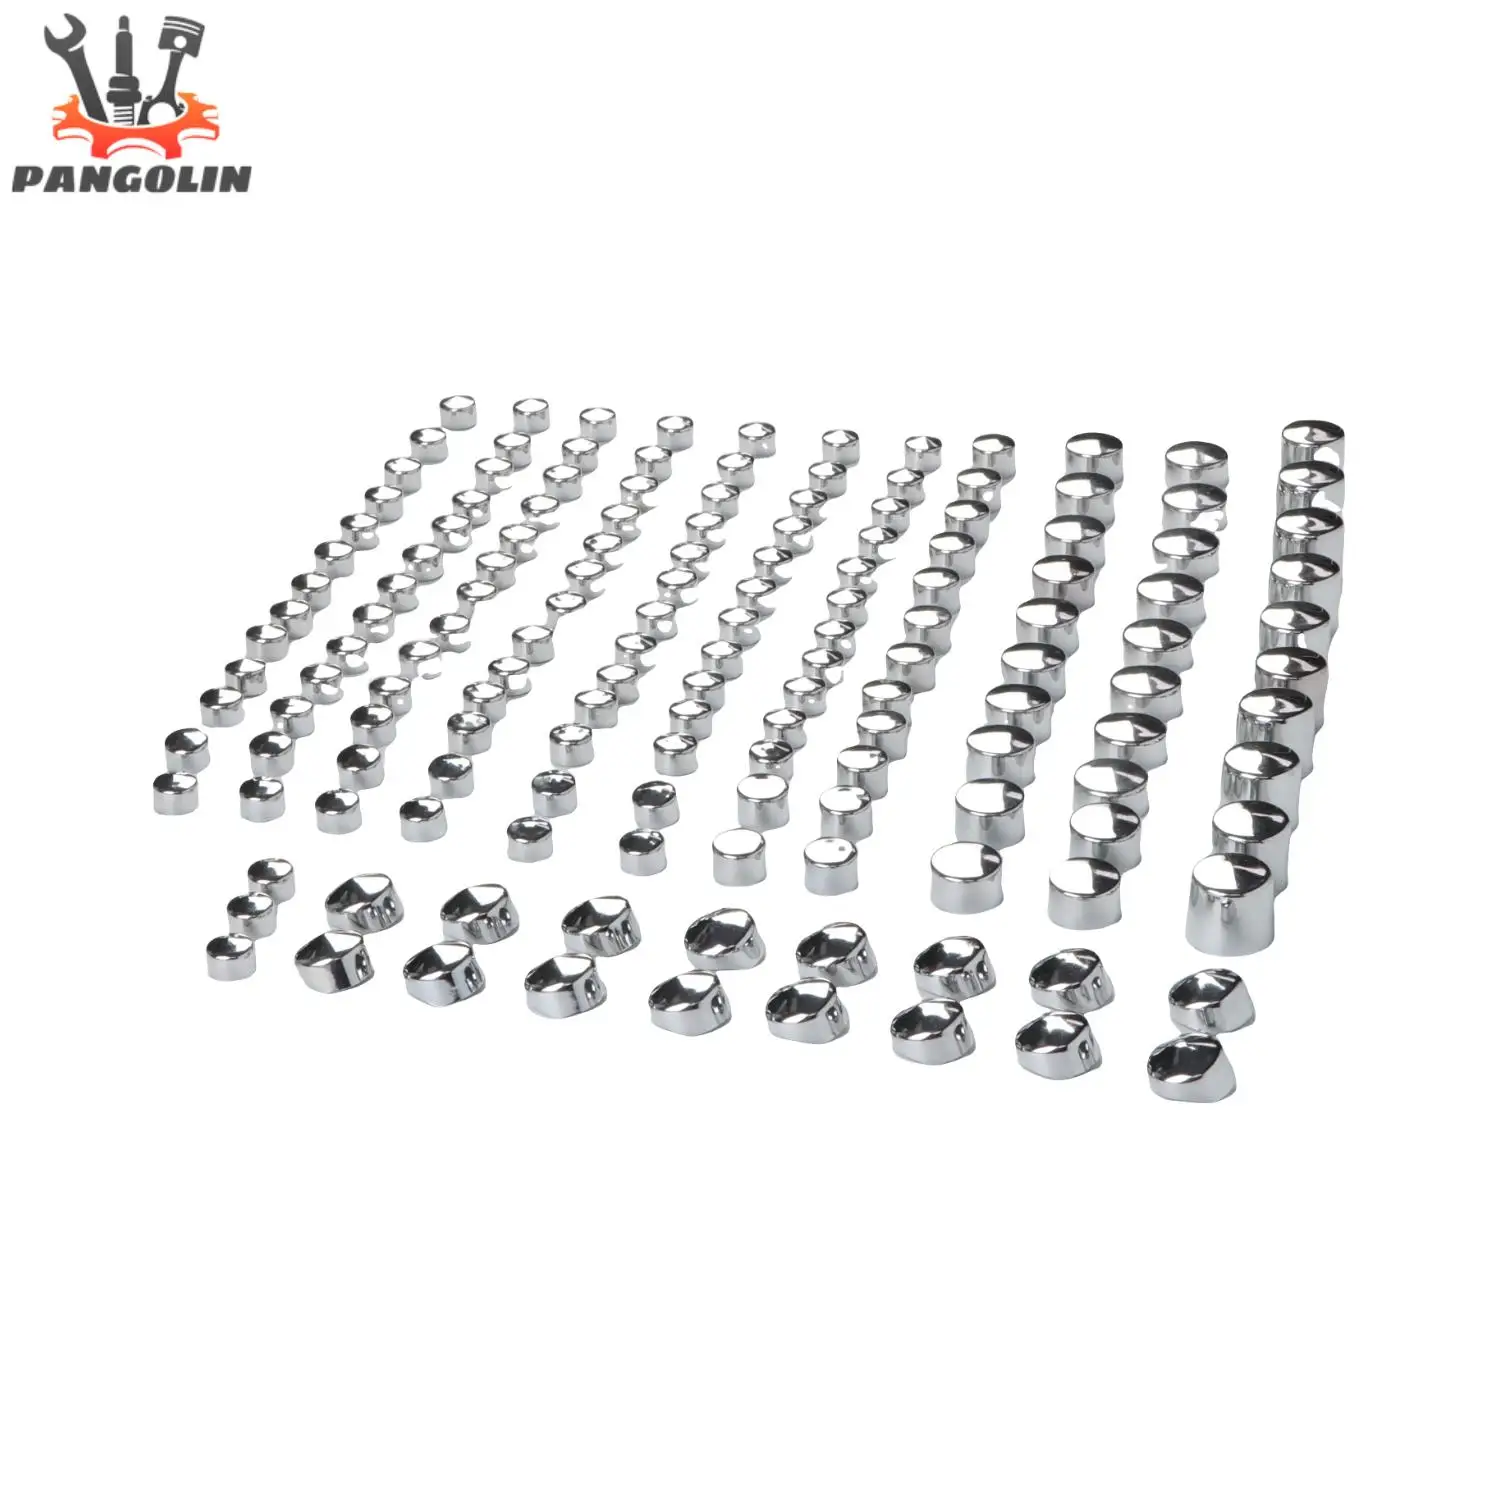 

120pcs Engine Bolt Cover Silver for 1984-1999 Harley Evolution 1999-2017 Twin Cam Engine Screw Bolt Cover Caps